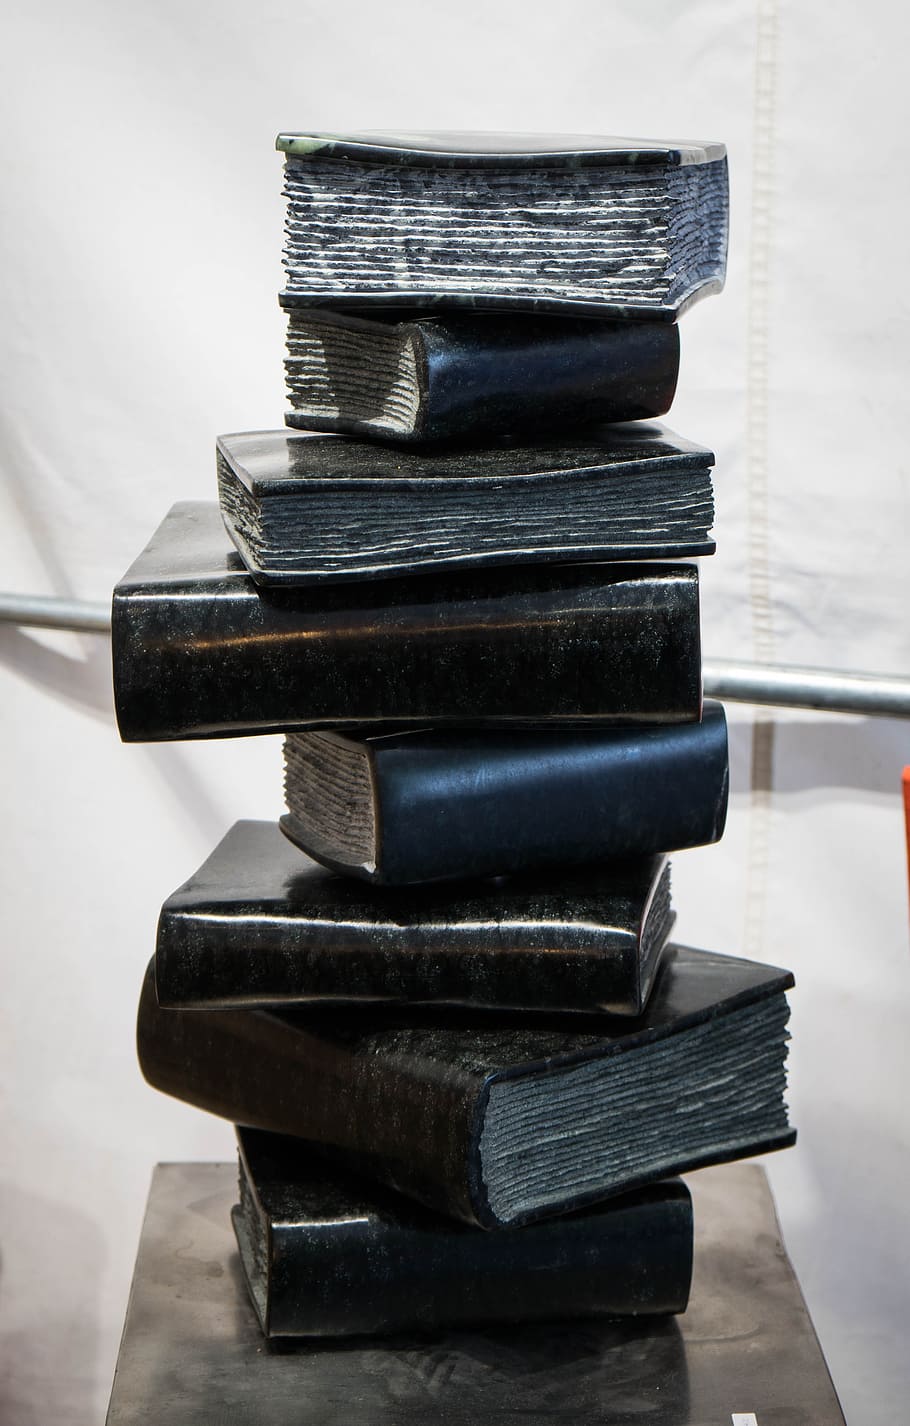 book, book stack, bookcase, stack, literature, library, spine, stacked, stone, information